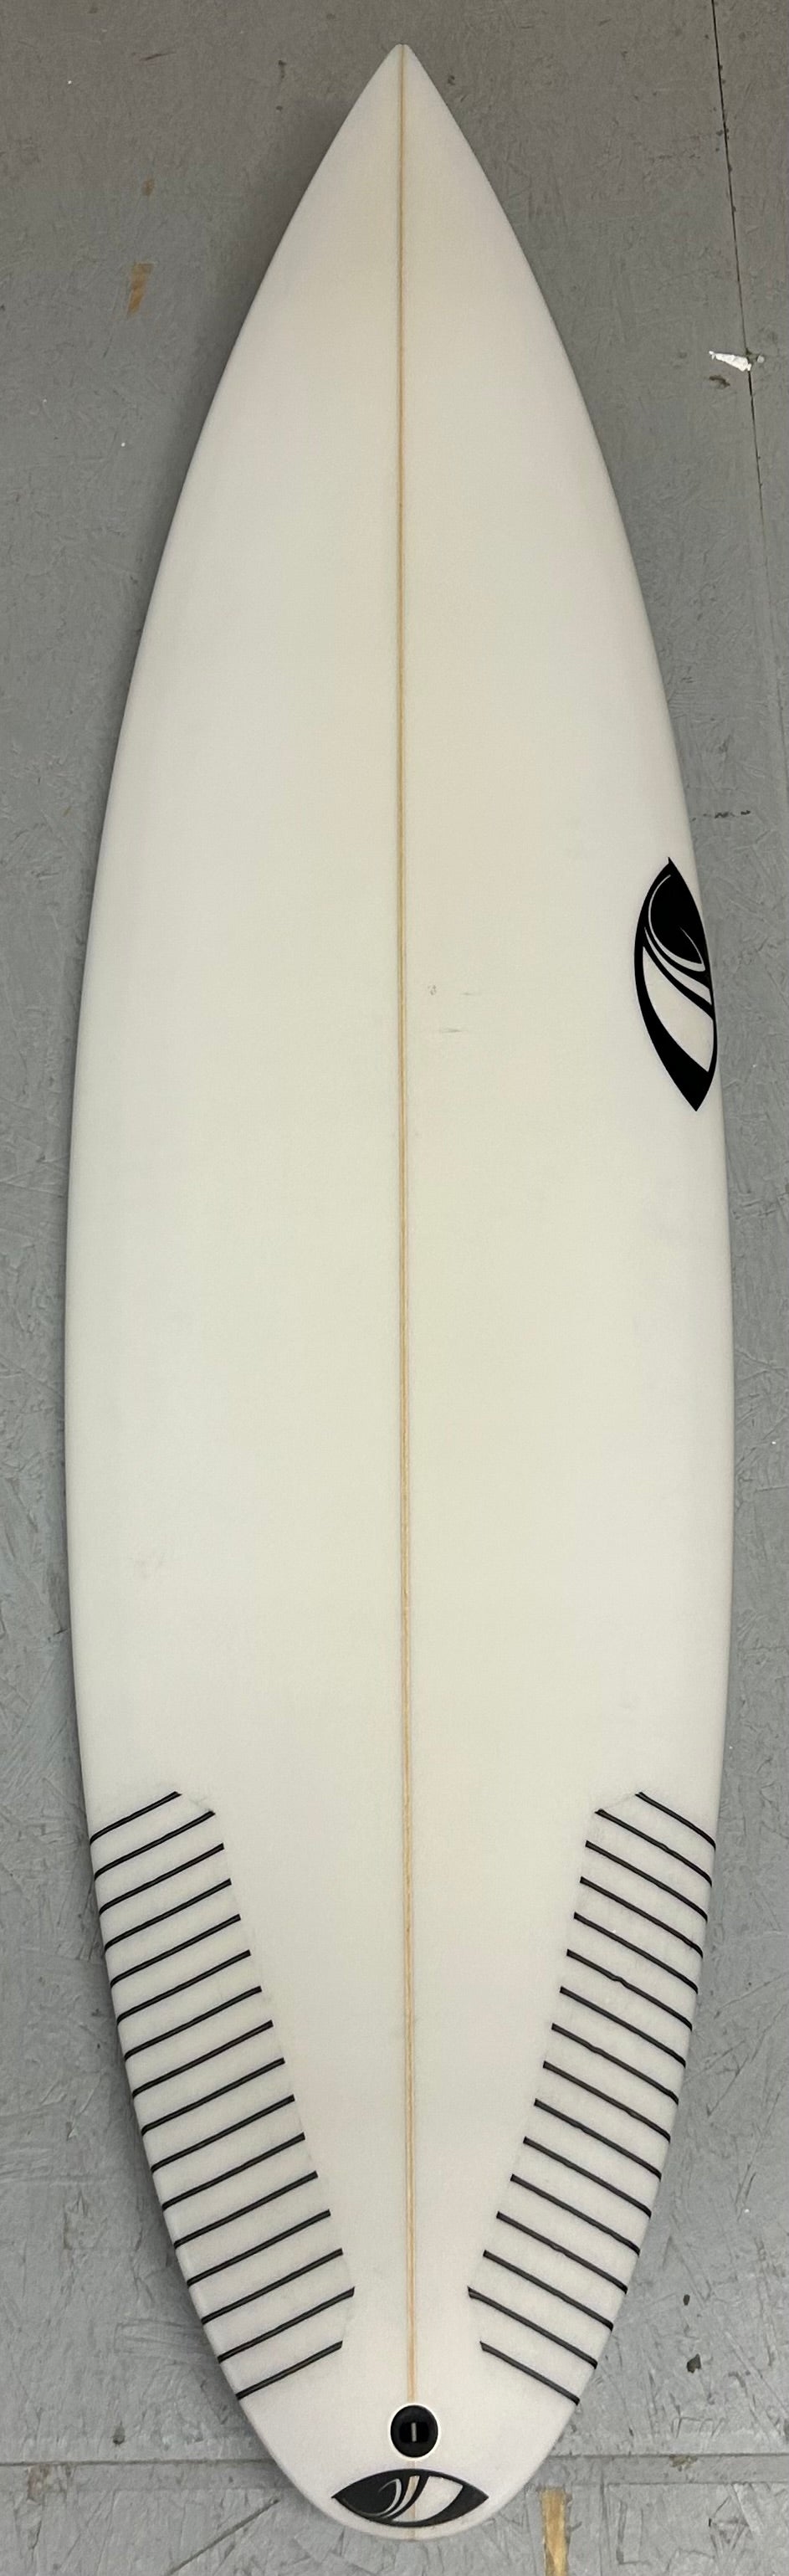 Used Surfboards – Page 2 – Sharp Eye Surfboards